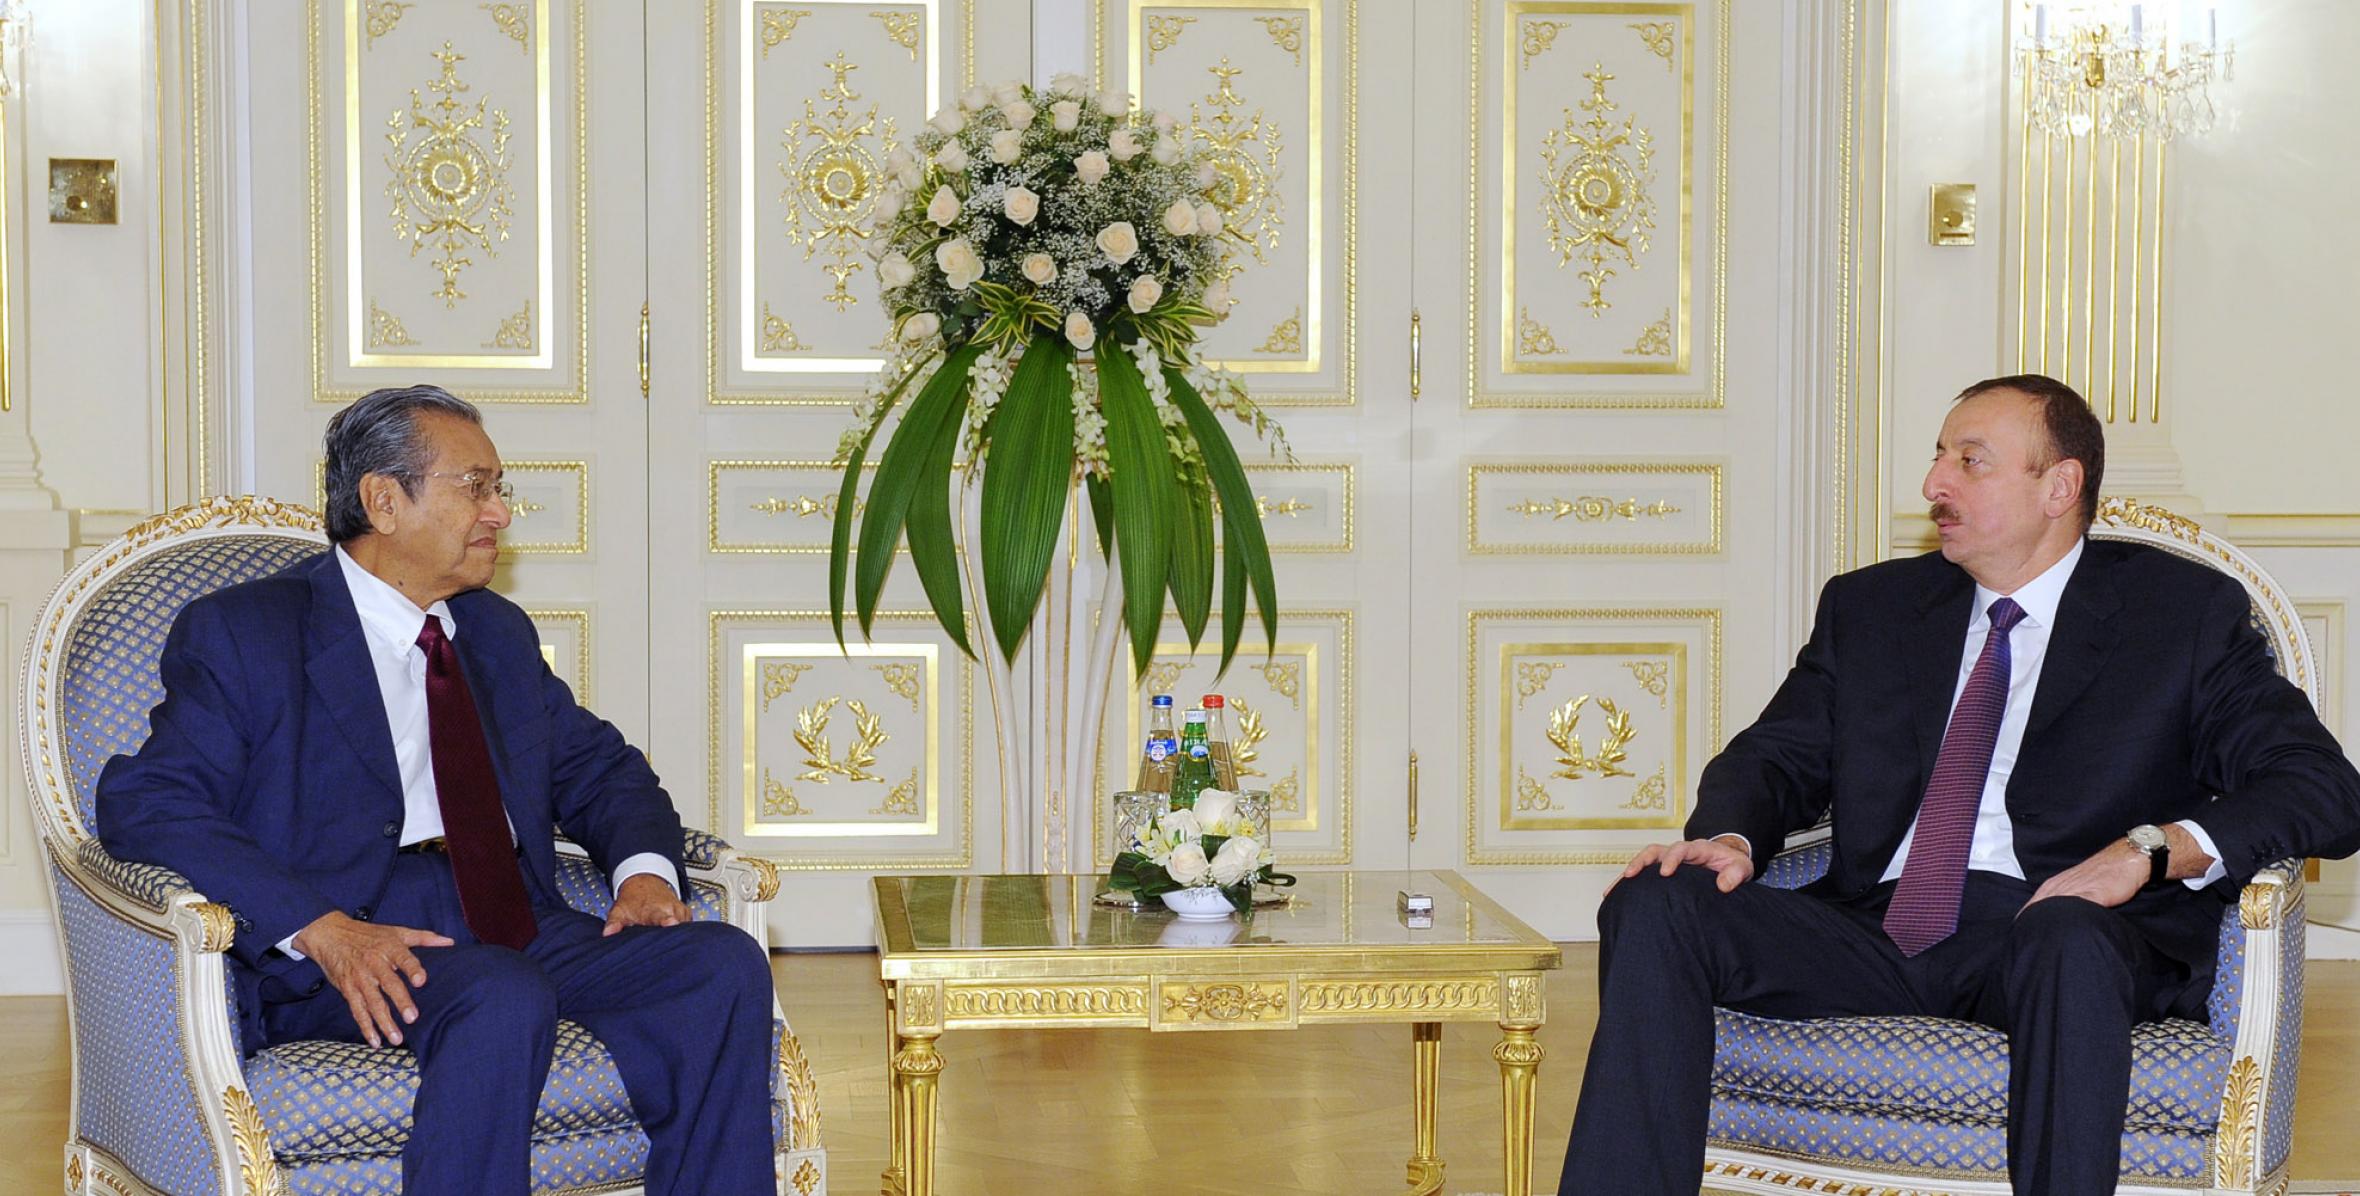 Ilham Aliyev received the former Prime Minister of Malaysia, Mahathir Mohamad